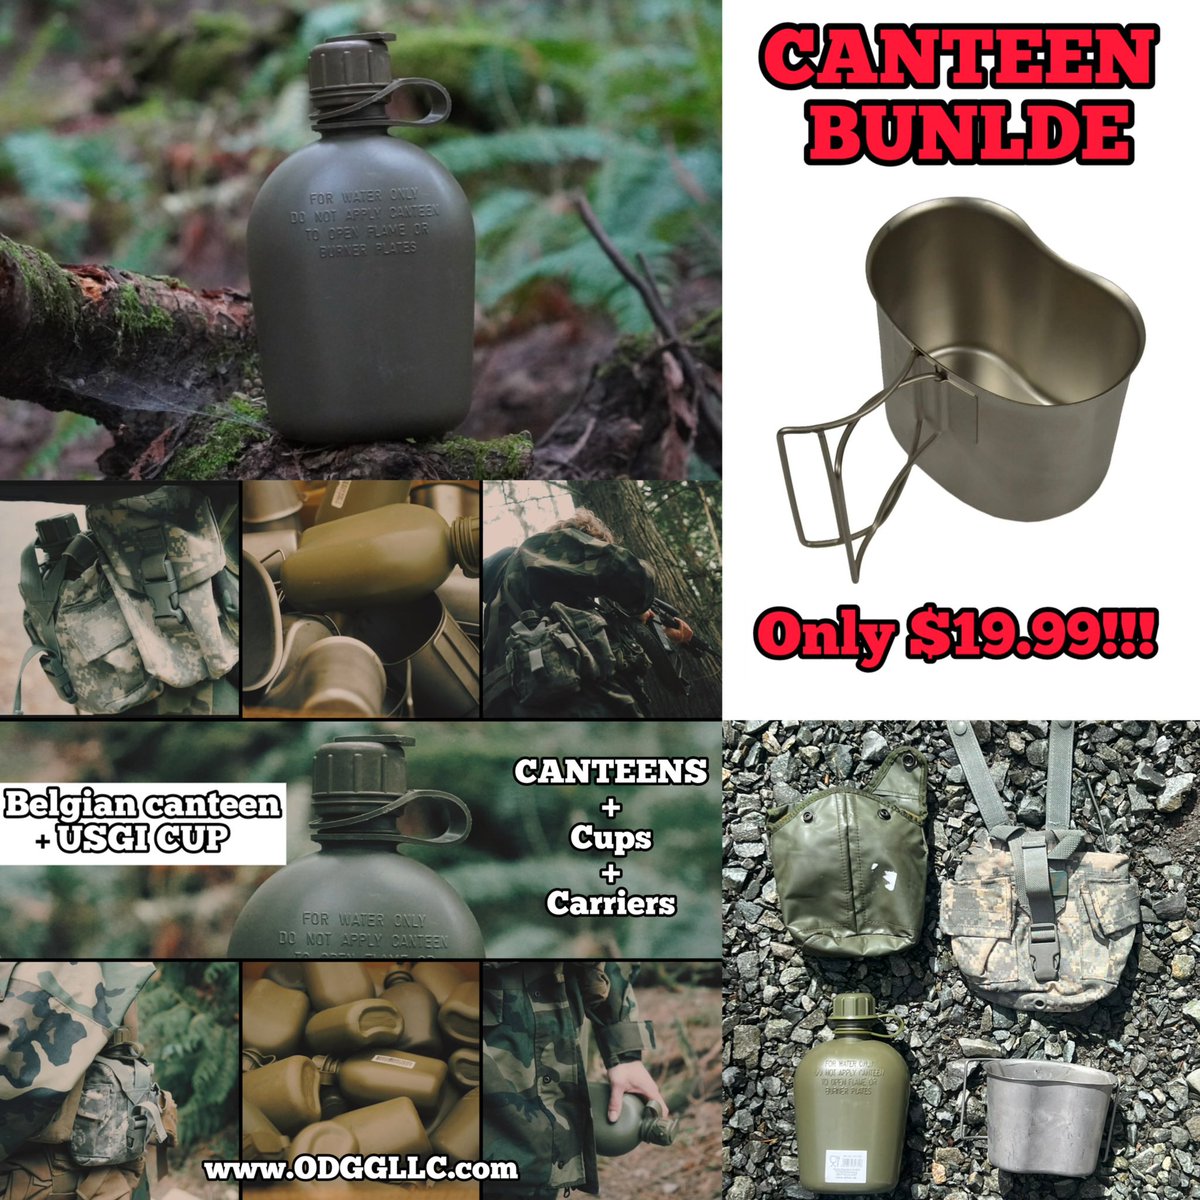 Canteen + x2 carriers + stainless steel cup bundle!!!!

Only $19.99

BELGIAN (new) canteens & carrier + USGI carrier and Stainless cup (used)